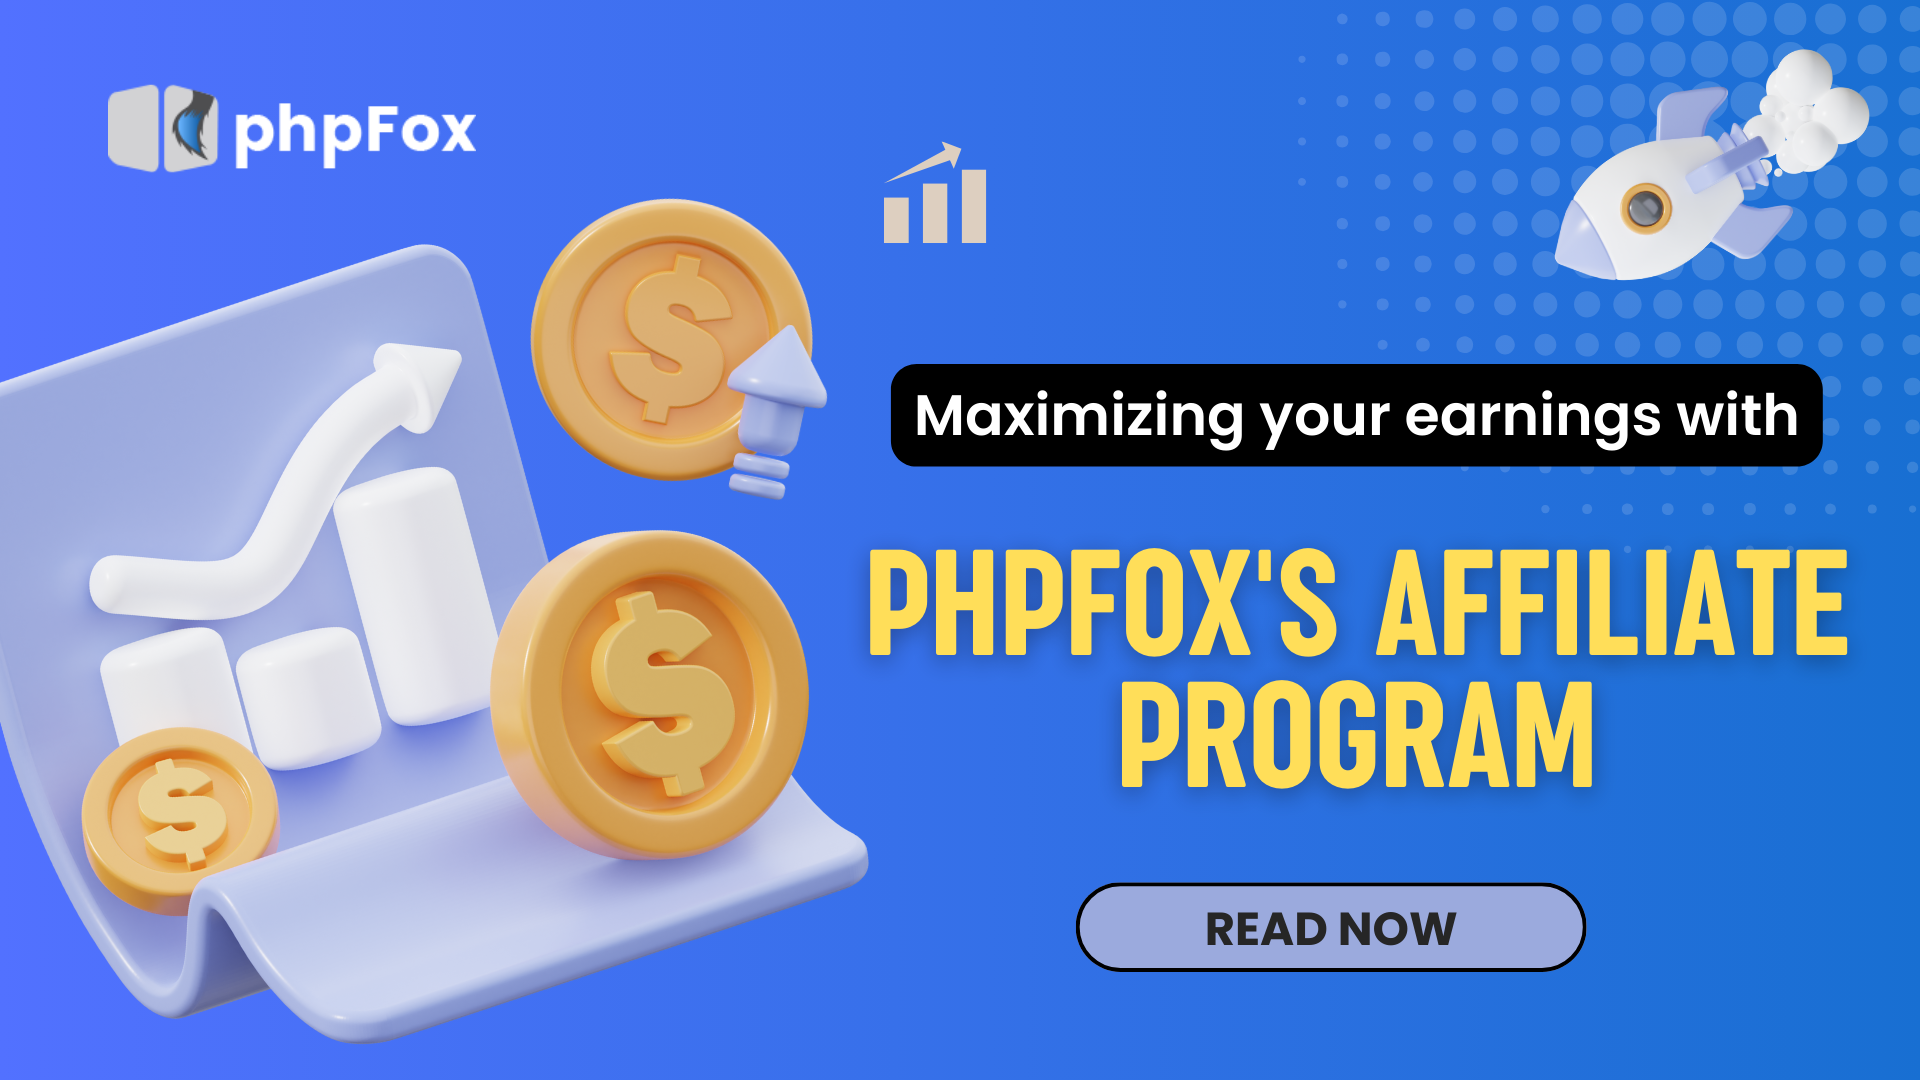 Tips for Maximizing Your Earnings with Affiliate Program